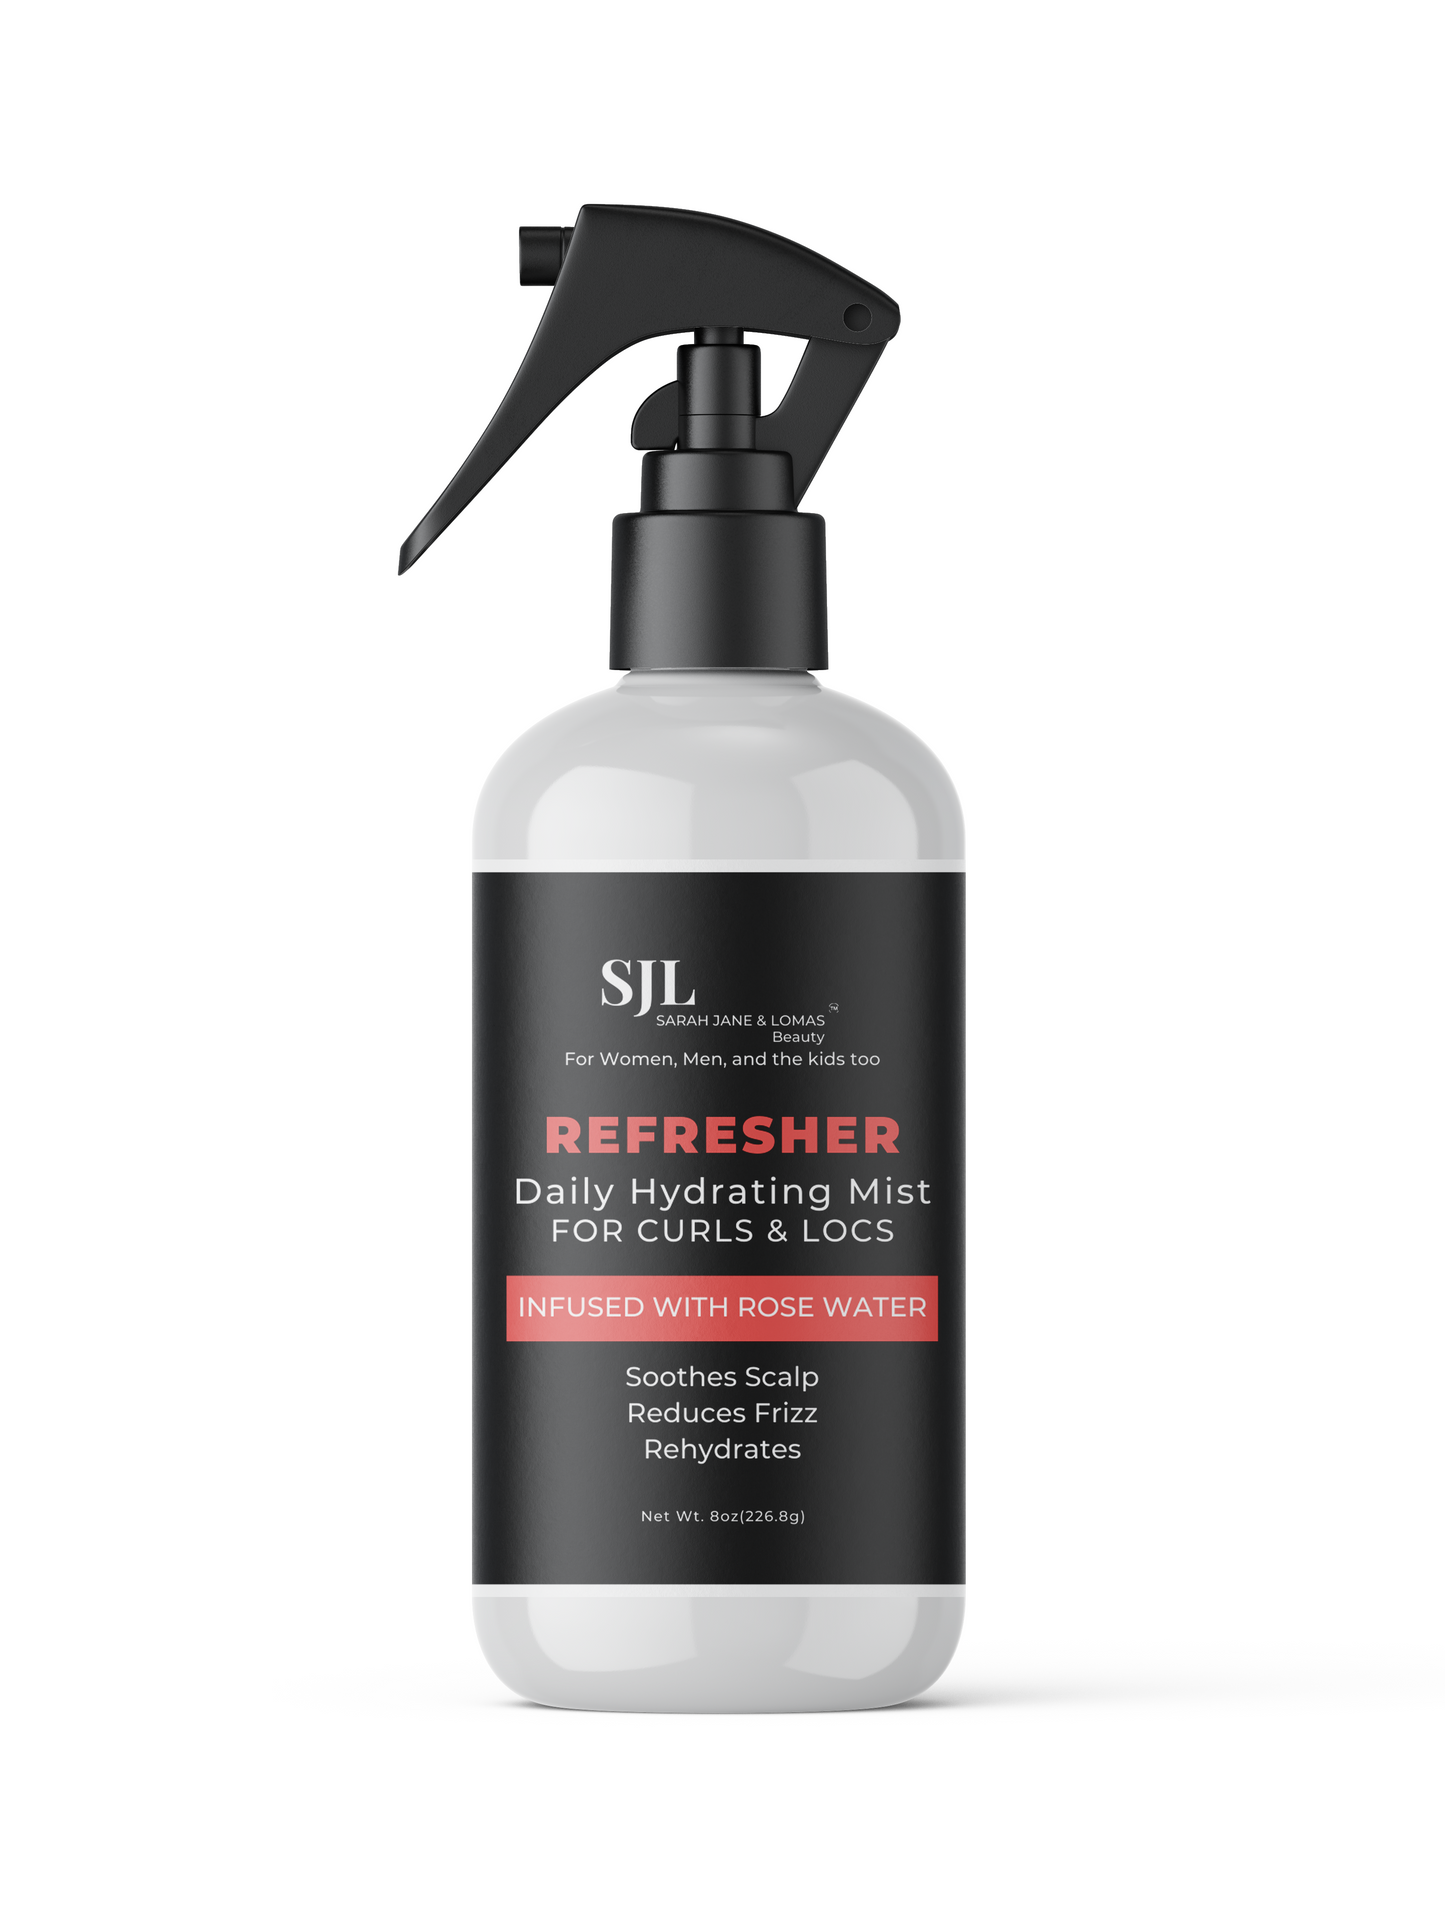 SJL Refresher, Daily Hydrating Mist for Curls & Locs